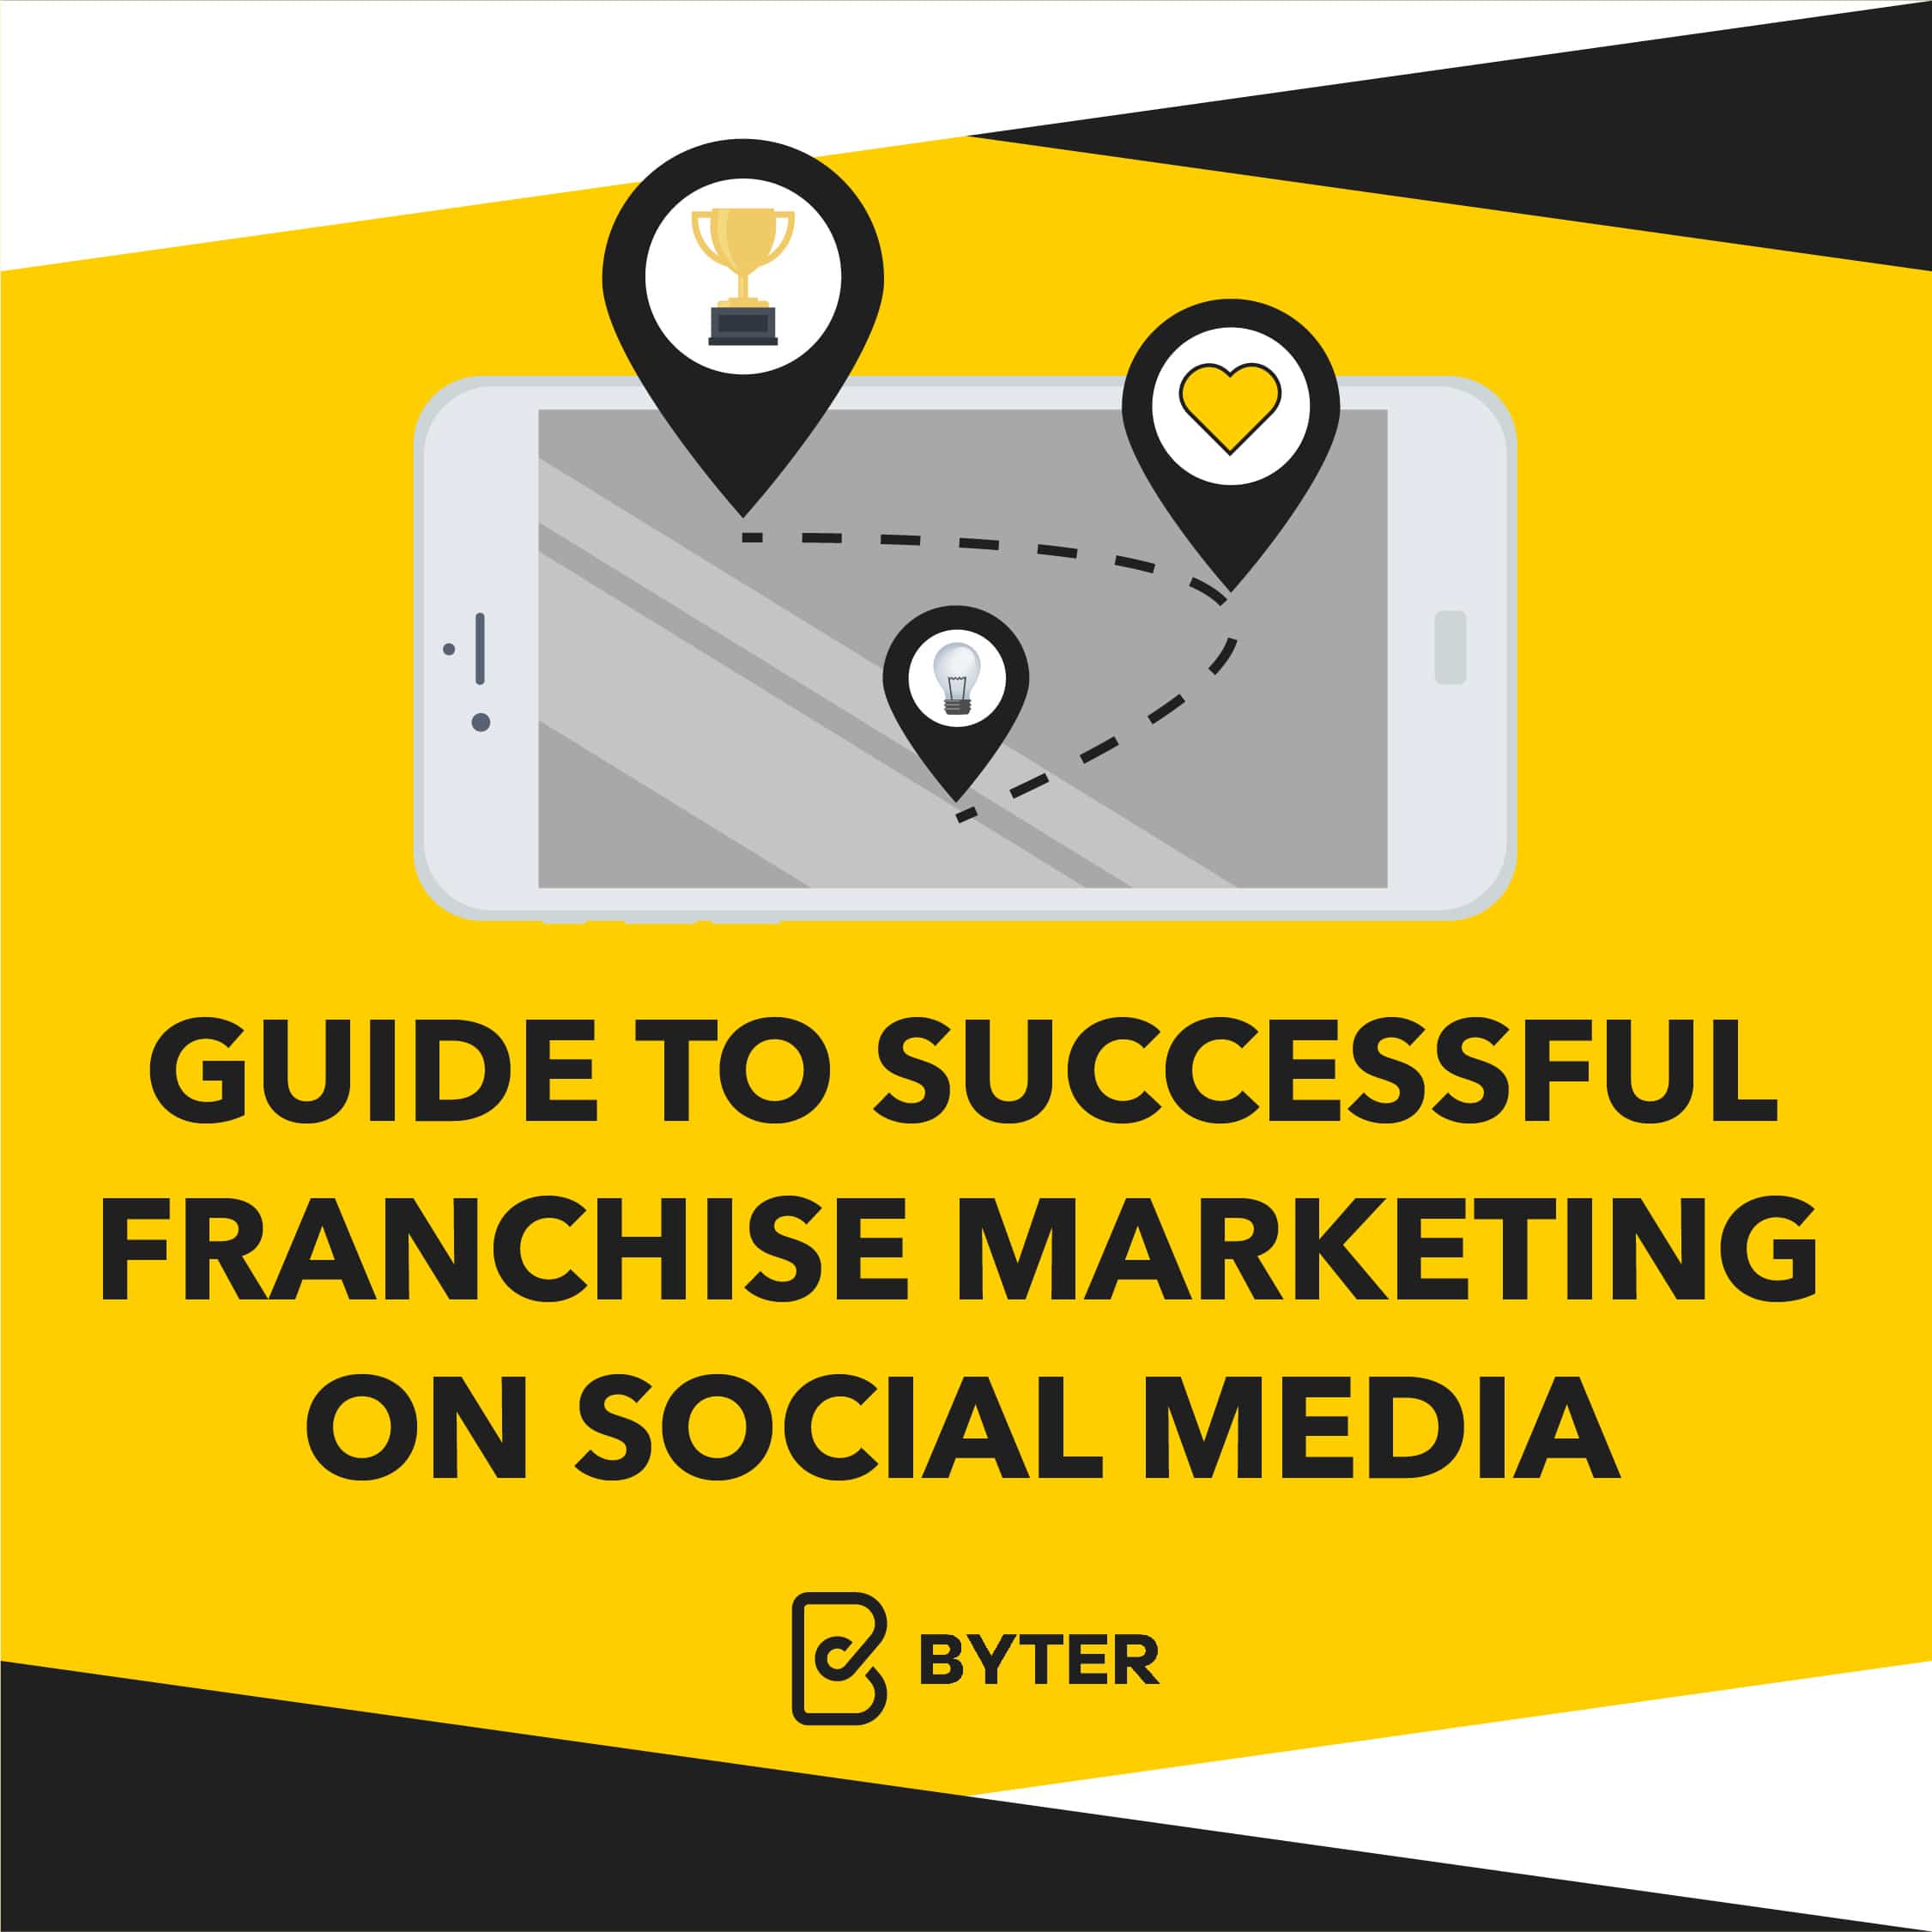 guiding to successful franchise marketing on social media